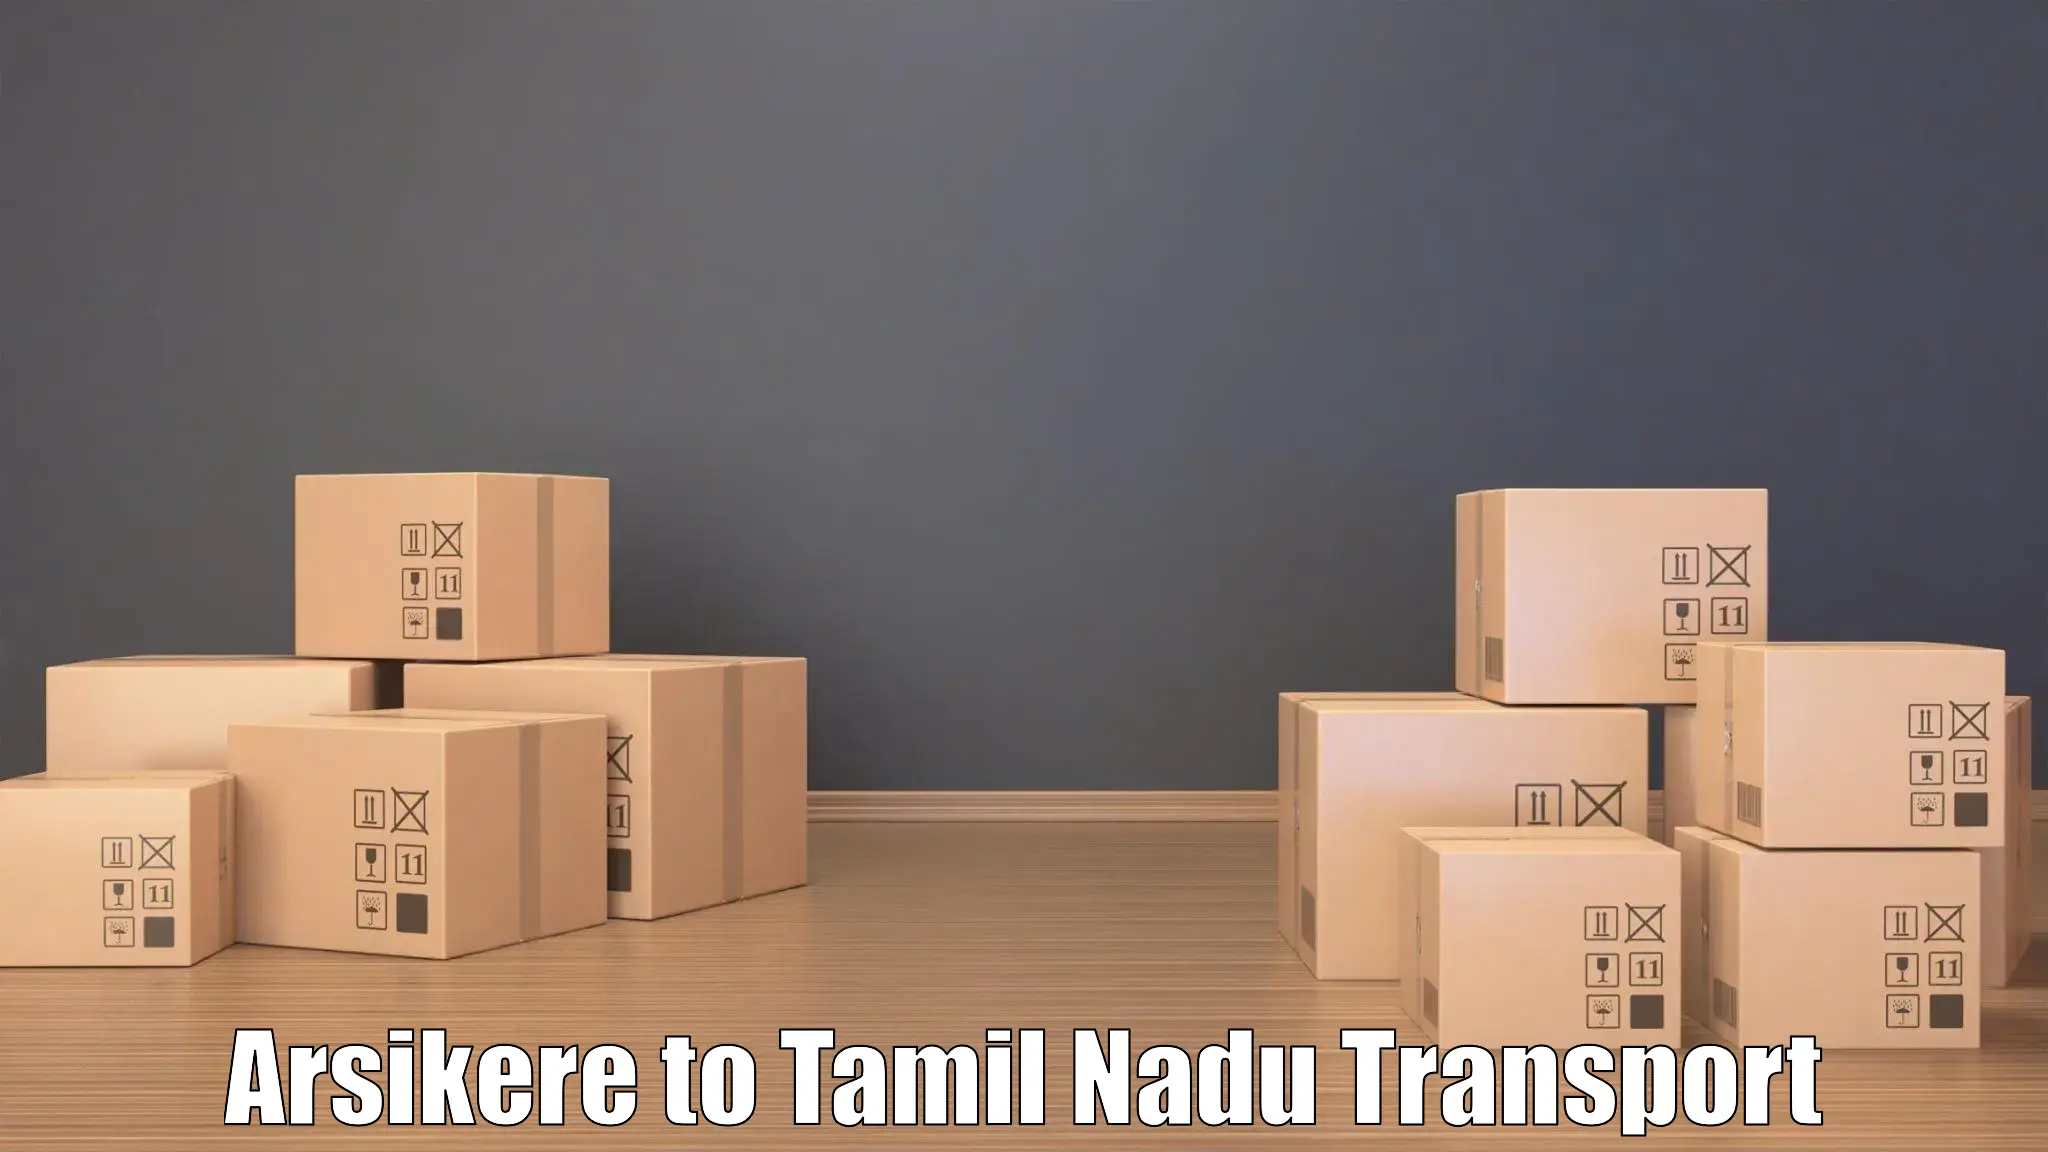 Truck transport companies in India Arsikere to Chetpet